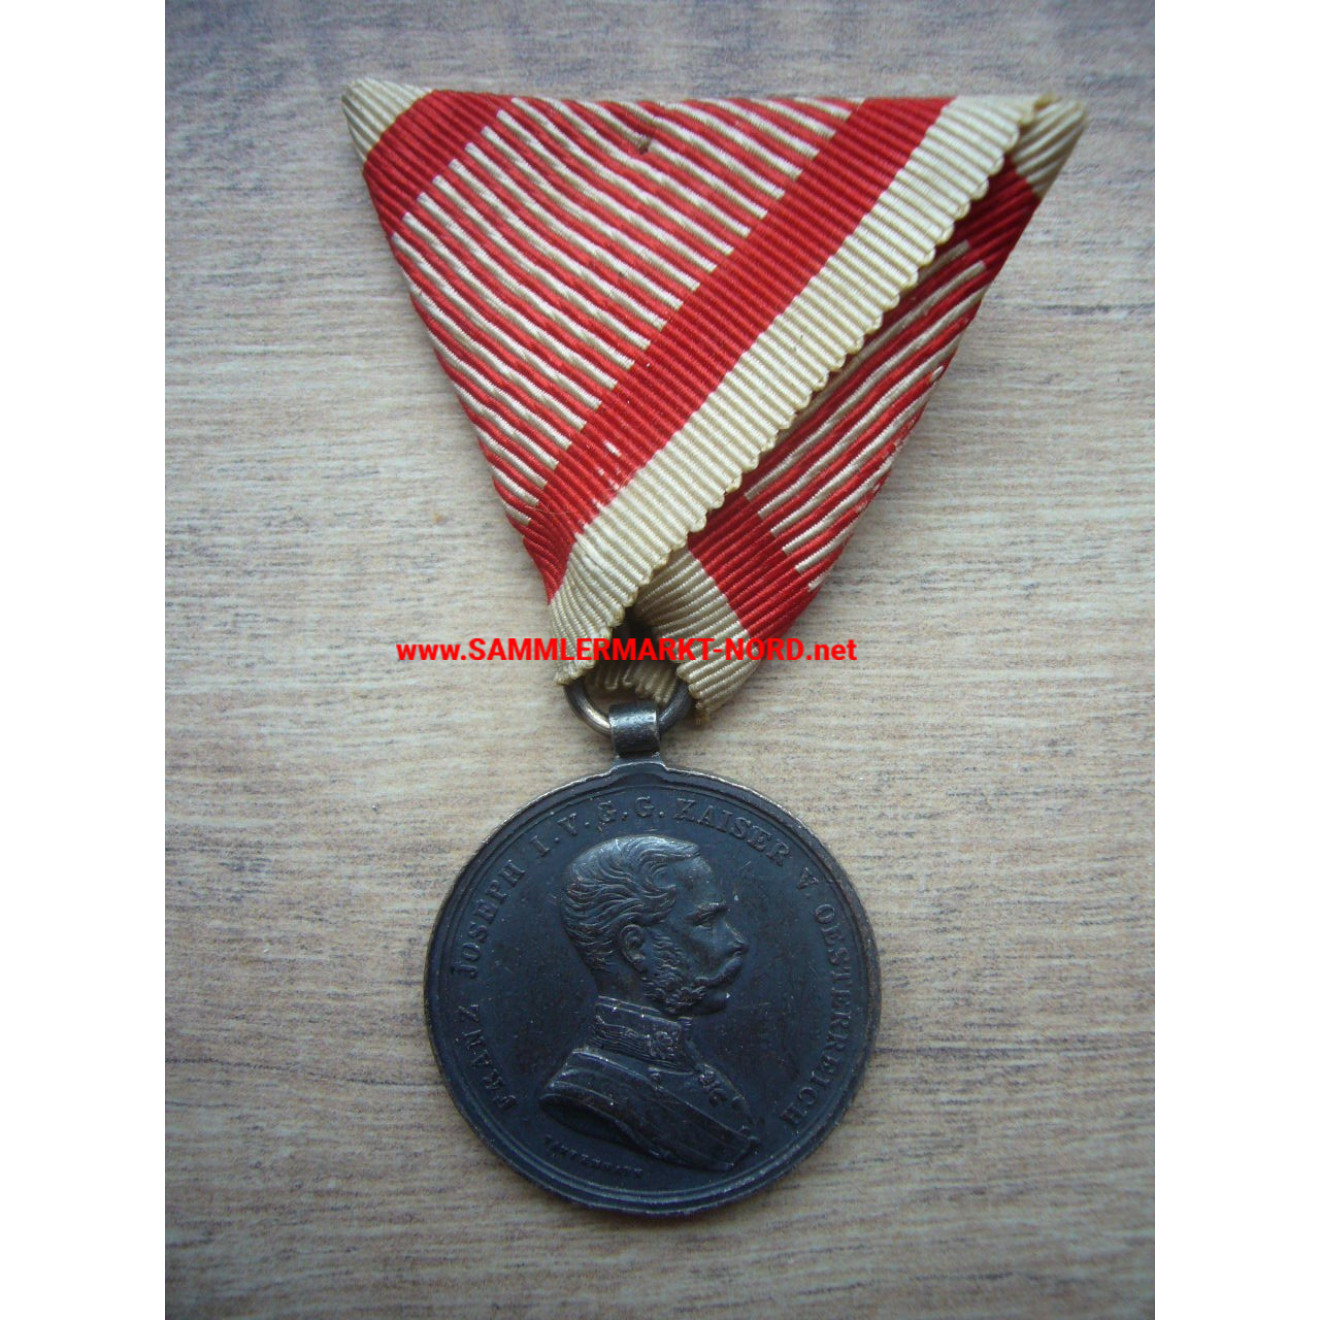 Imperial and Royal Austria - Silver Medal for Bravery 1st Class Emperor Franz Josef